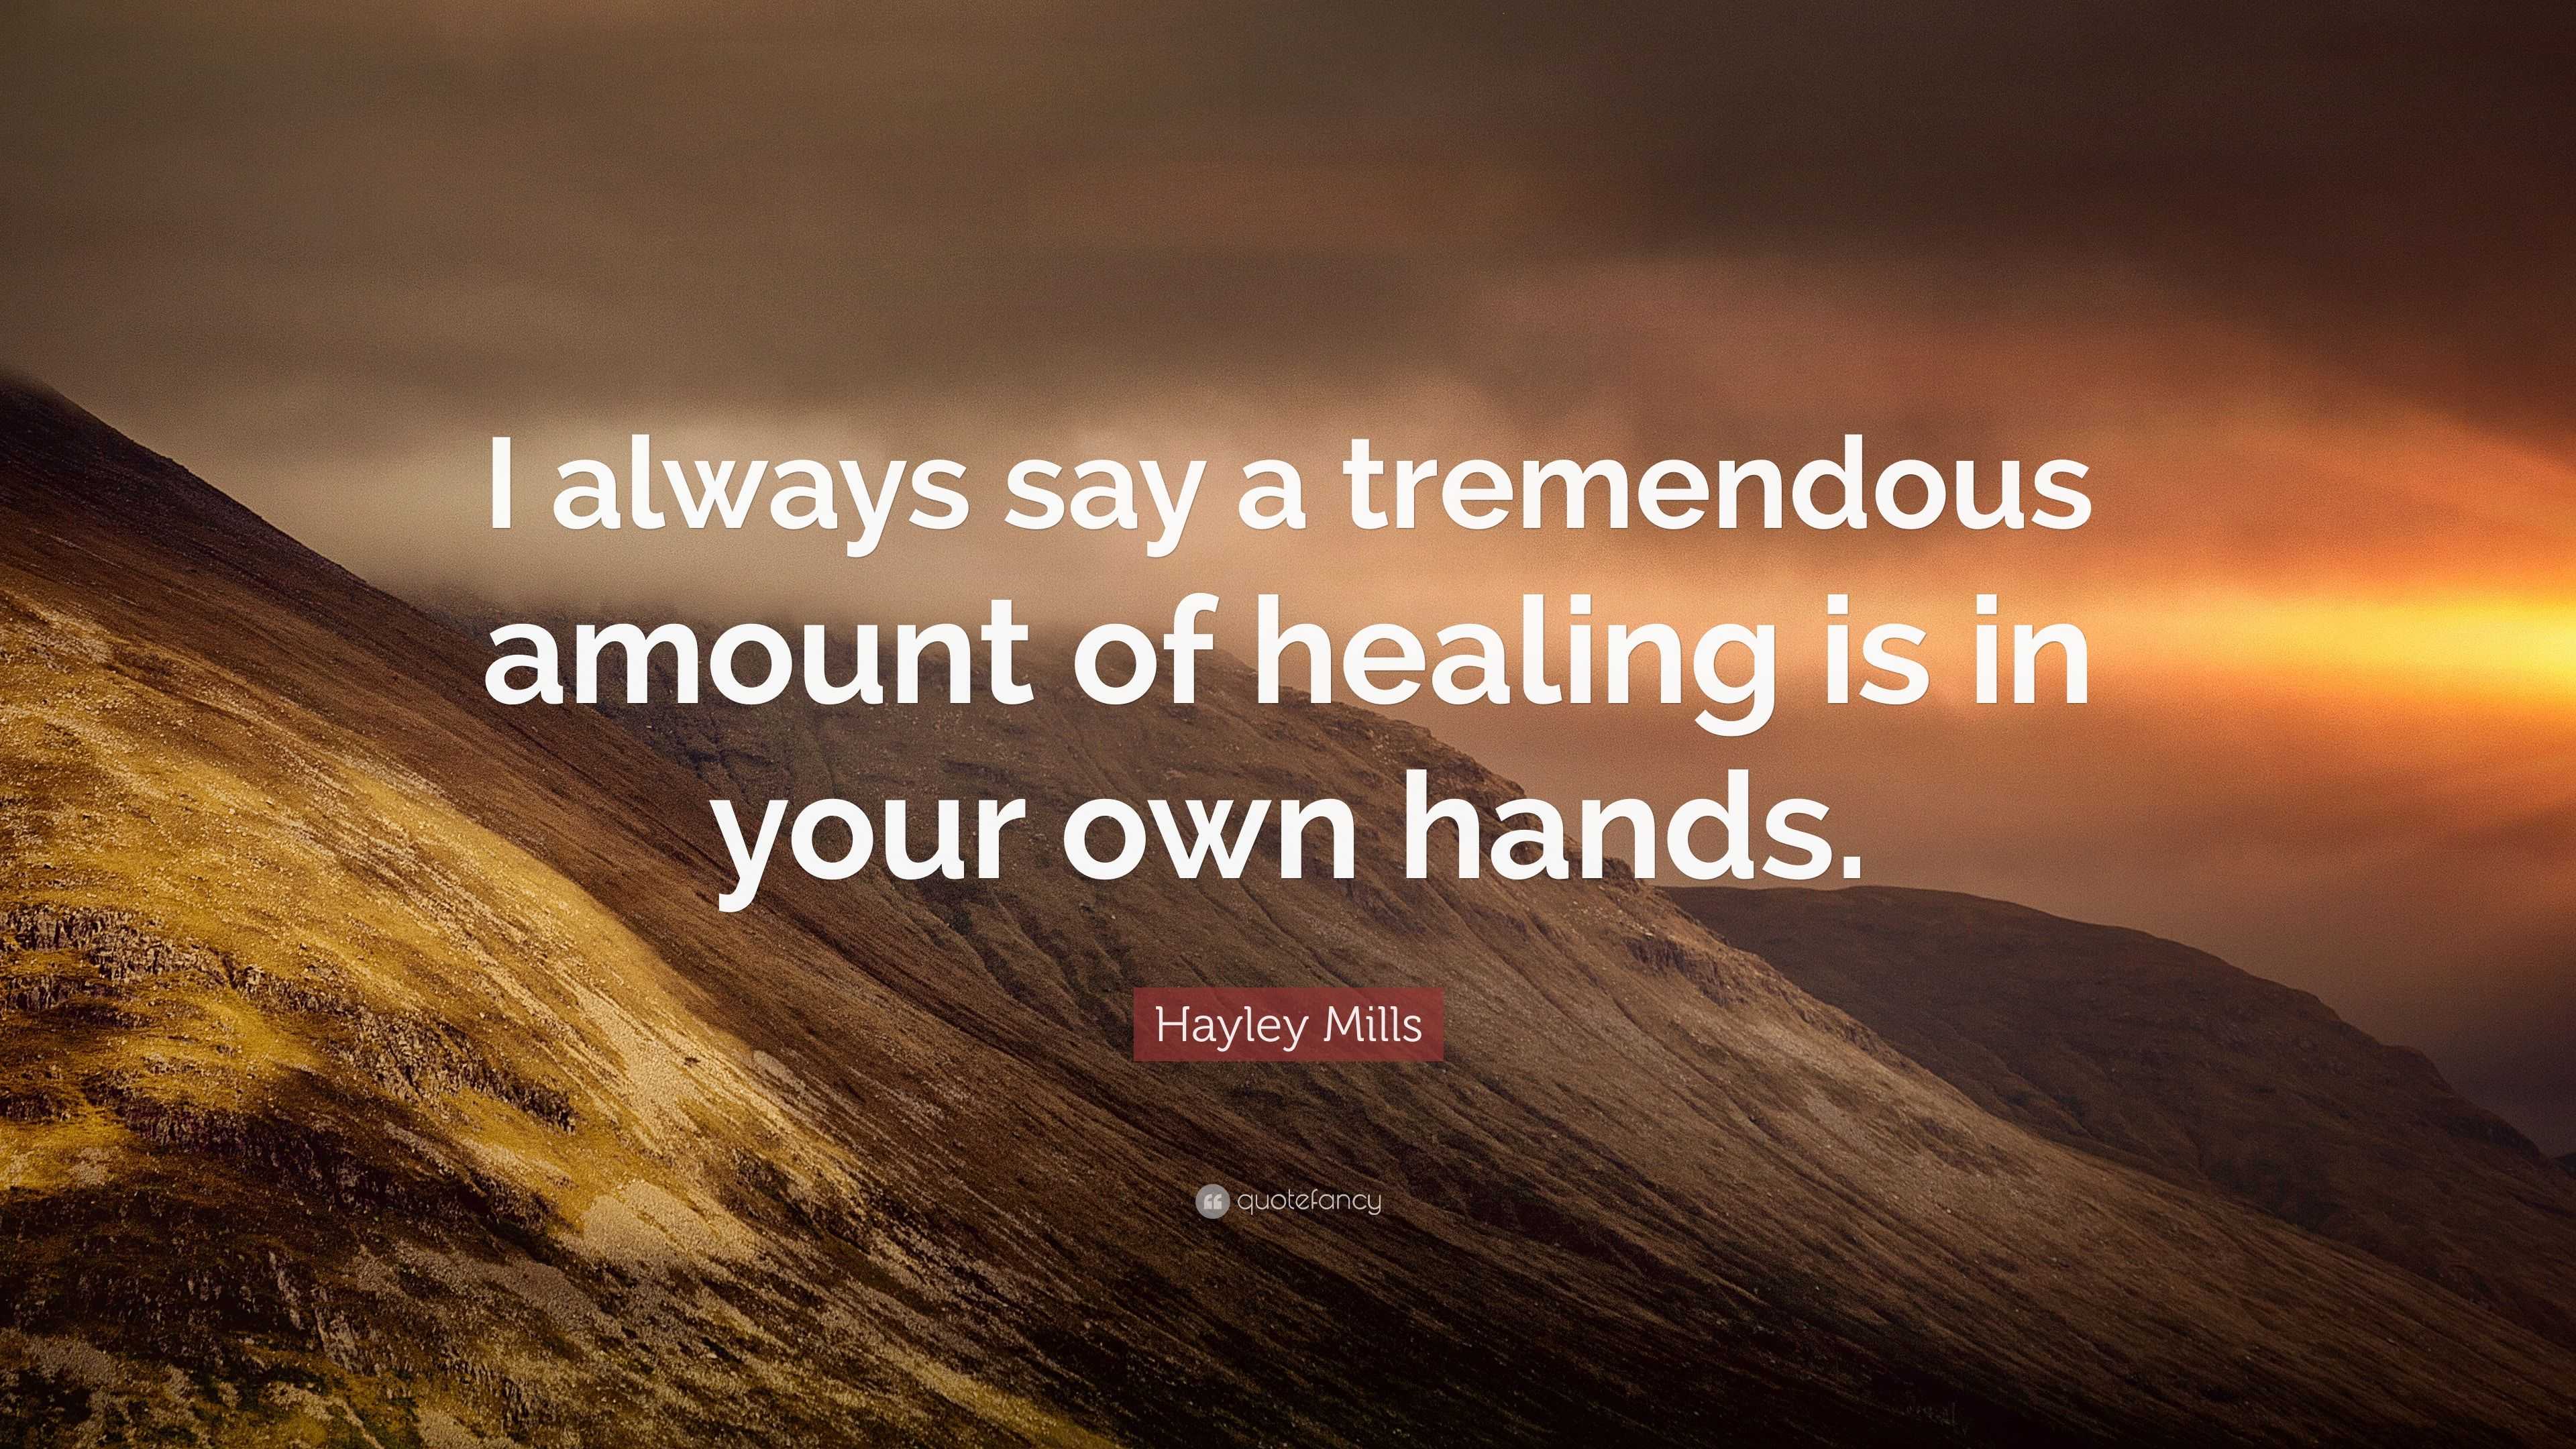 Hayley Mills Quote: “I always say a tremendous amount of healing is in ...